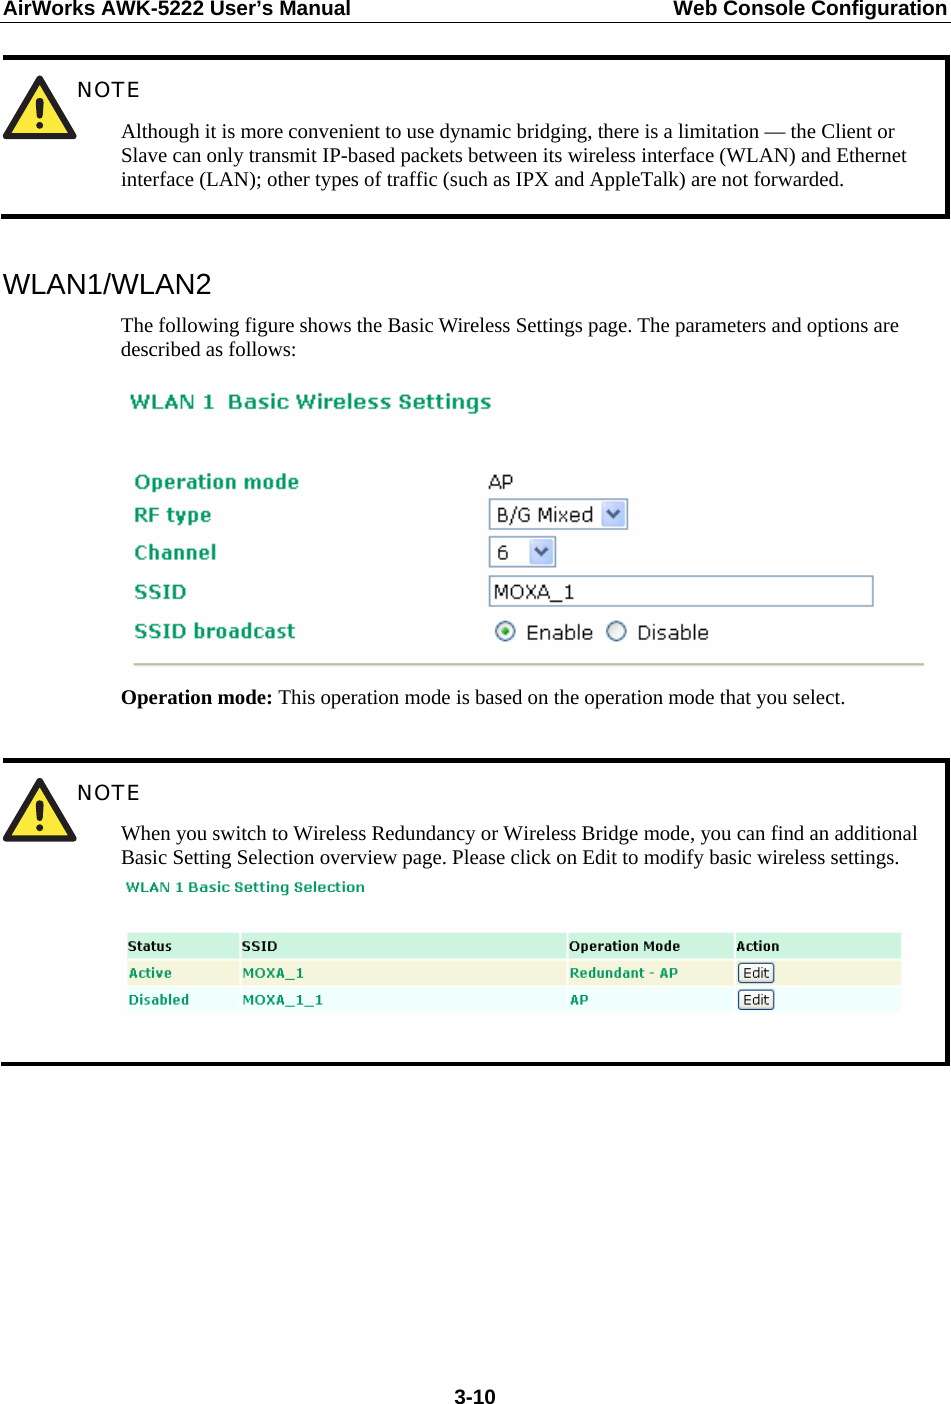 AirWorks AWK-5222 User’s Manual  Web Console Configuration  3-10 NOTE Although it is more convenient to use dynamic bridging, there is a limitation — the Client or Slave can only transmit IP-based packets between its wireless interface (WLAN) and Ethernet interface (LAN); other types of traffic (such as IPX and AppleTalk) are not forwarded.  WLAN1/WLAN2 The following figure shows the Basic Wireless Settings page. The parameters and options are described as follows:  Operation mode: This operation mode is based on the operation mode that you select.   NOTE When you switch to Wireless Redundancy or Wireless Bridge mode, you can find an additional Basic Setting Selection overview page. Please click on Edit to modify basic wireless settings.          